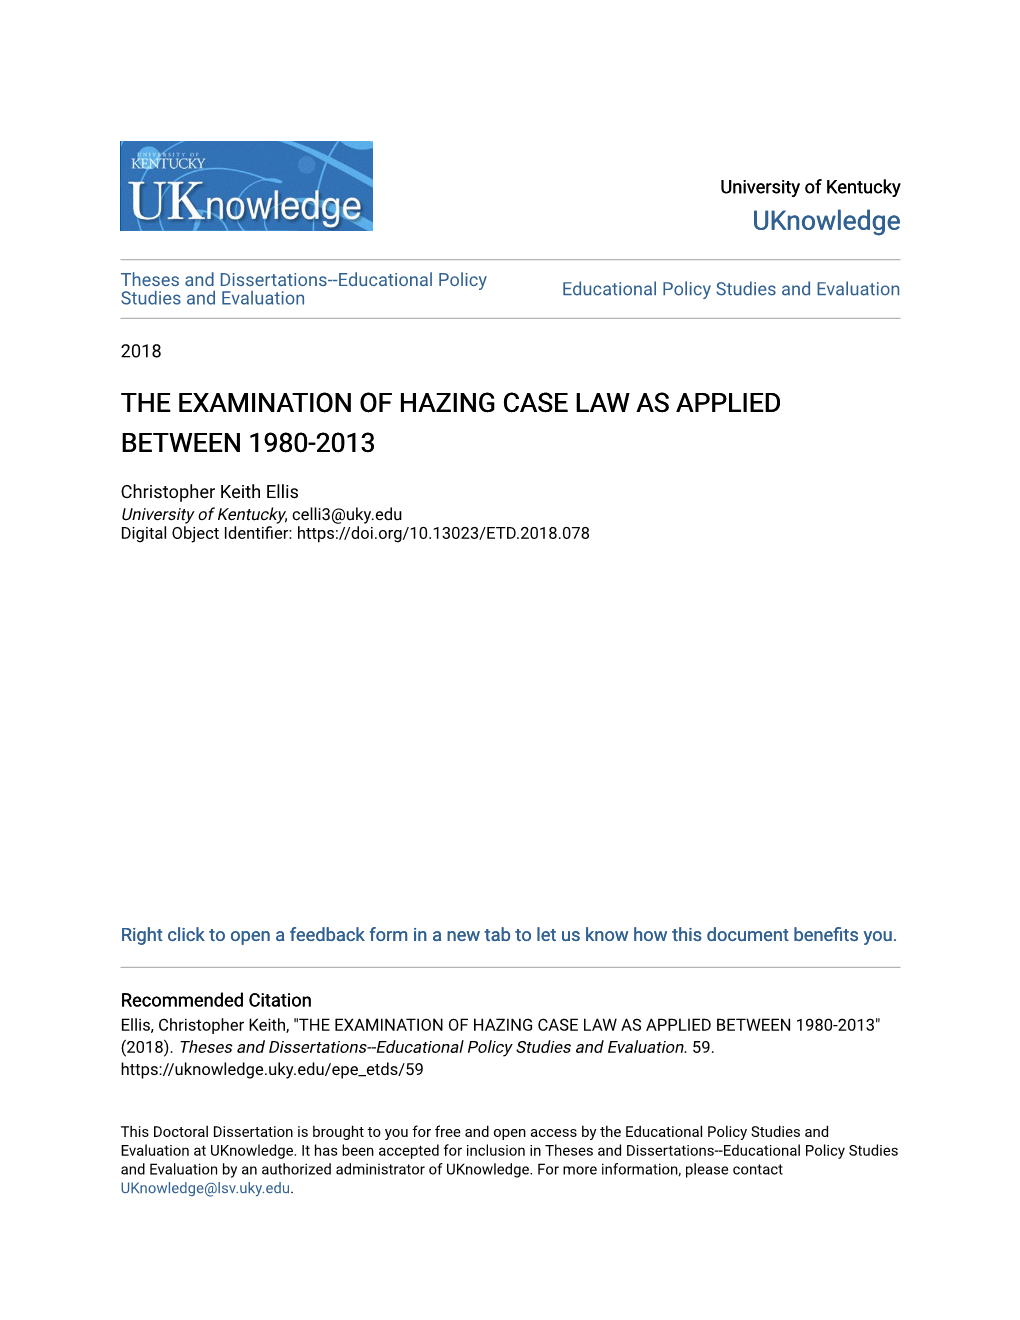 The Examination of Hazing Case Law As Applied Between 1980-2013